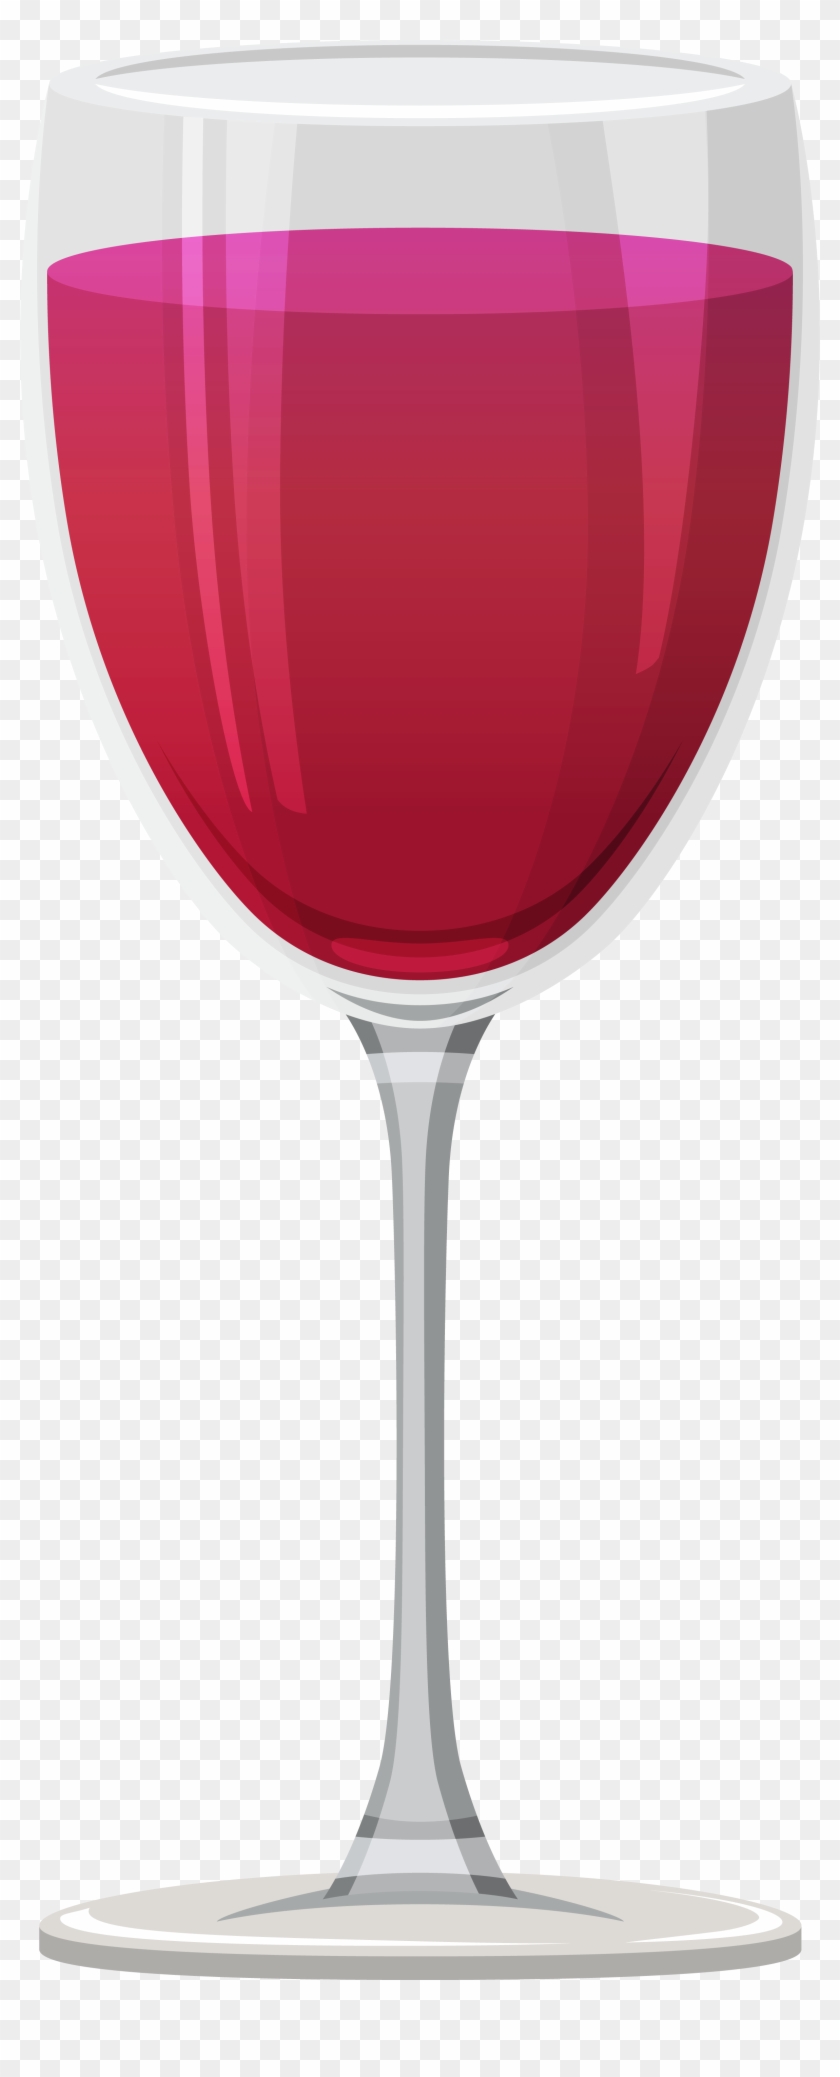 Glass Png Image - Sharbat Glass Clipart #3870916